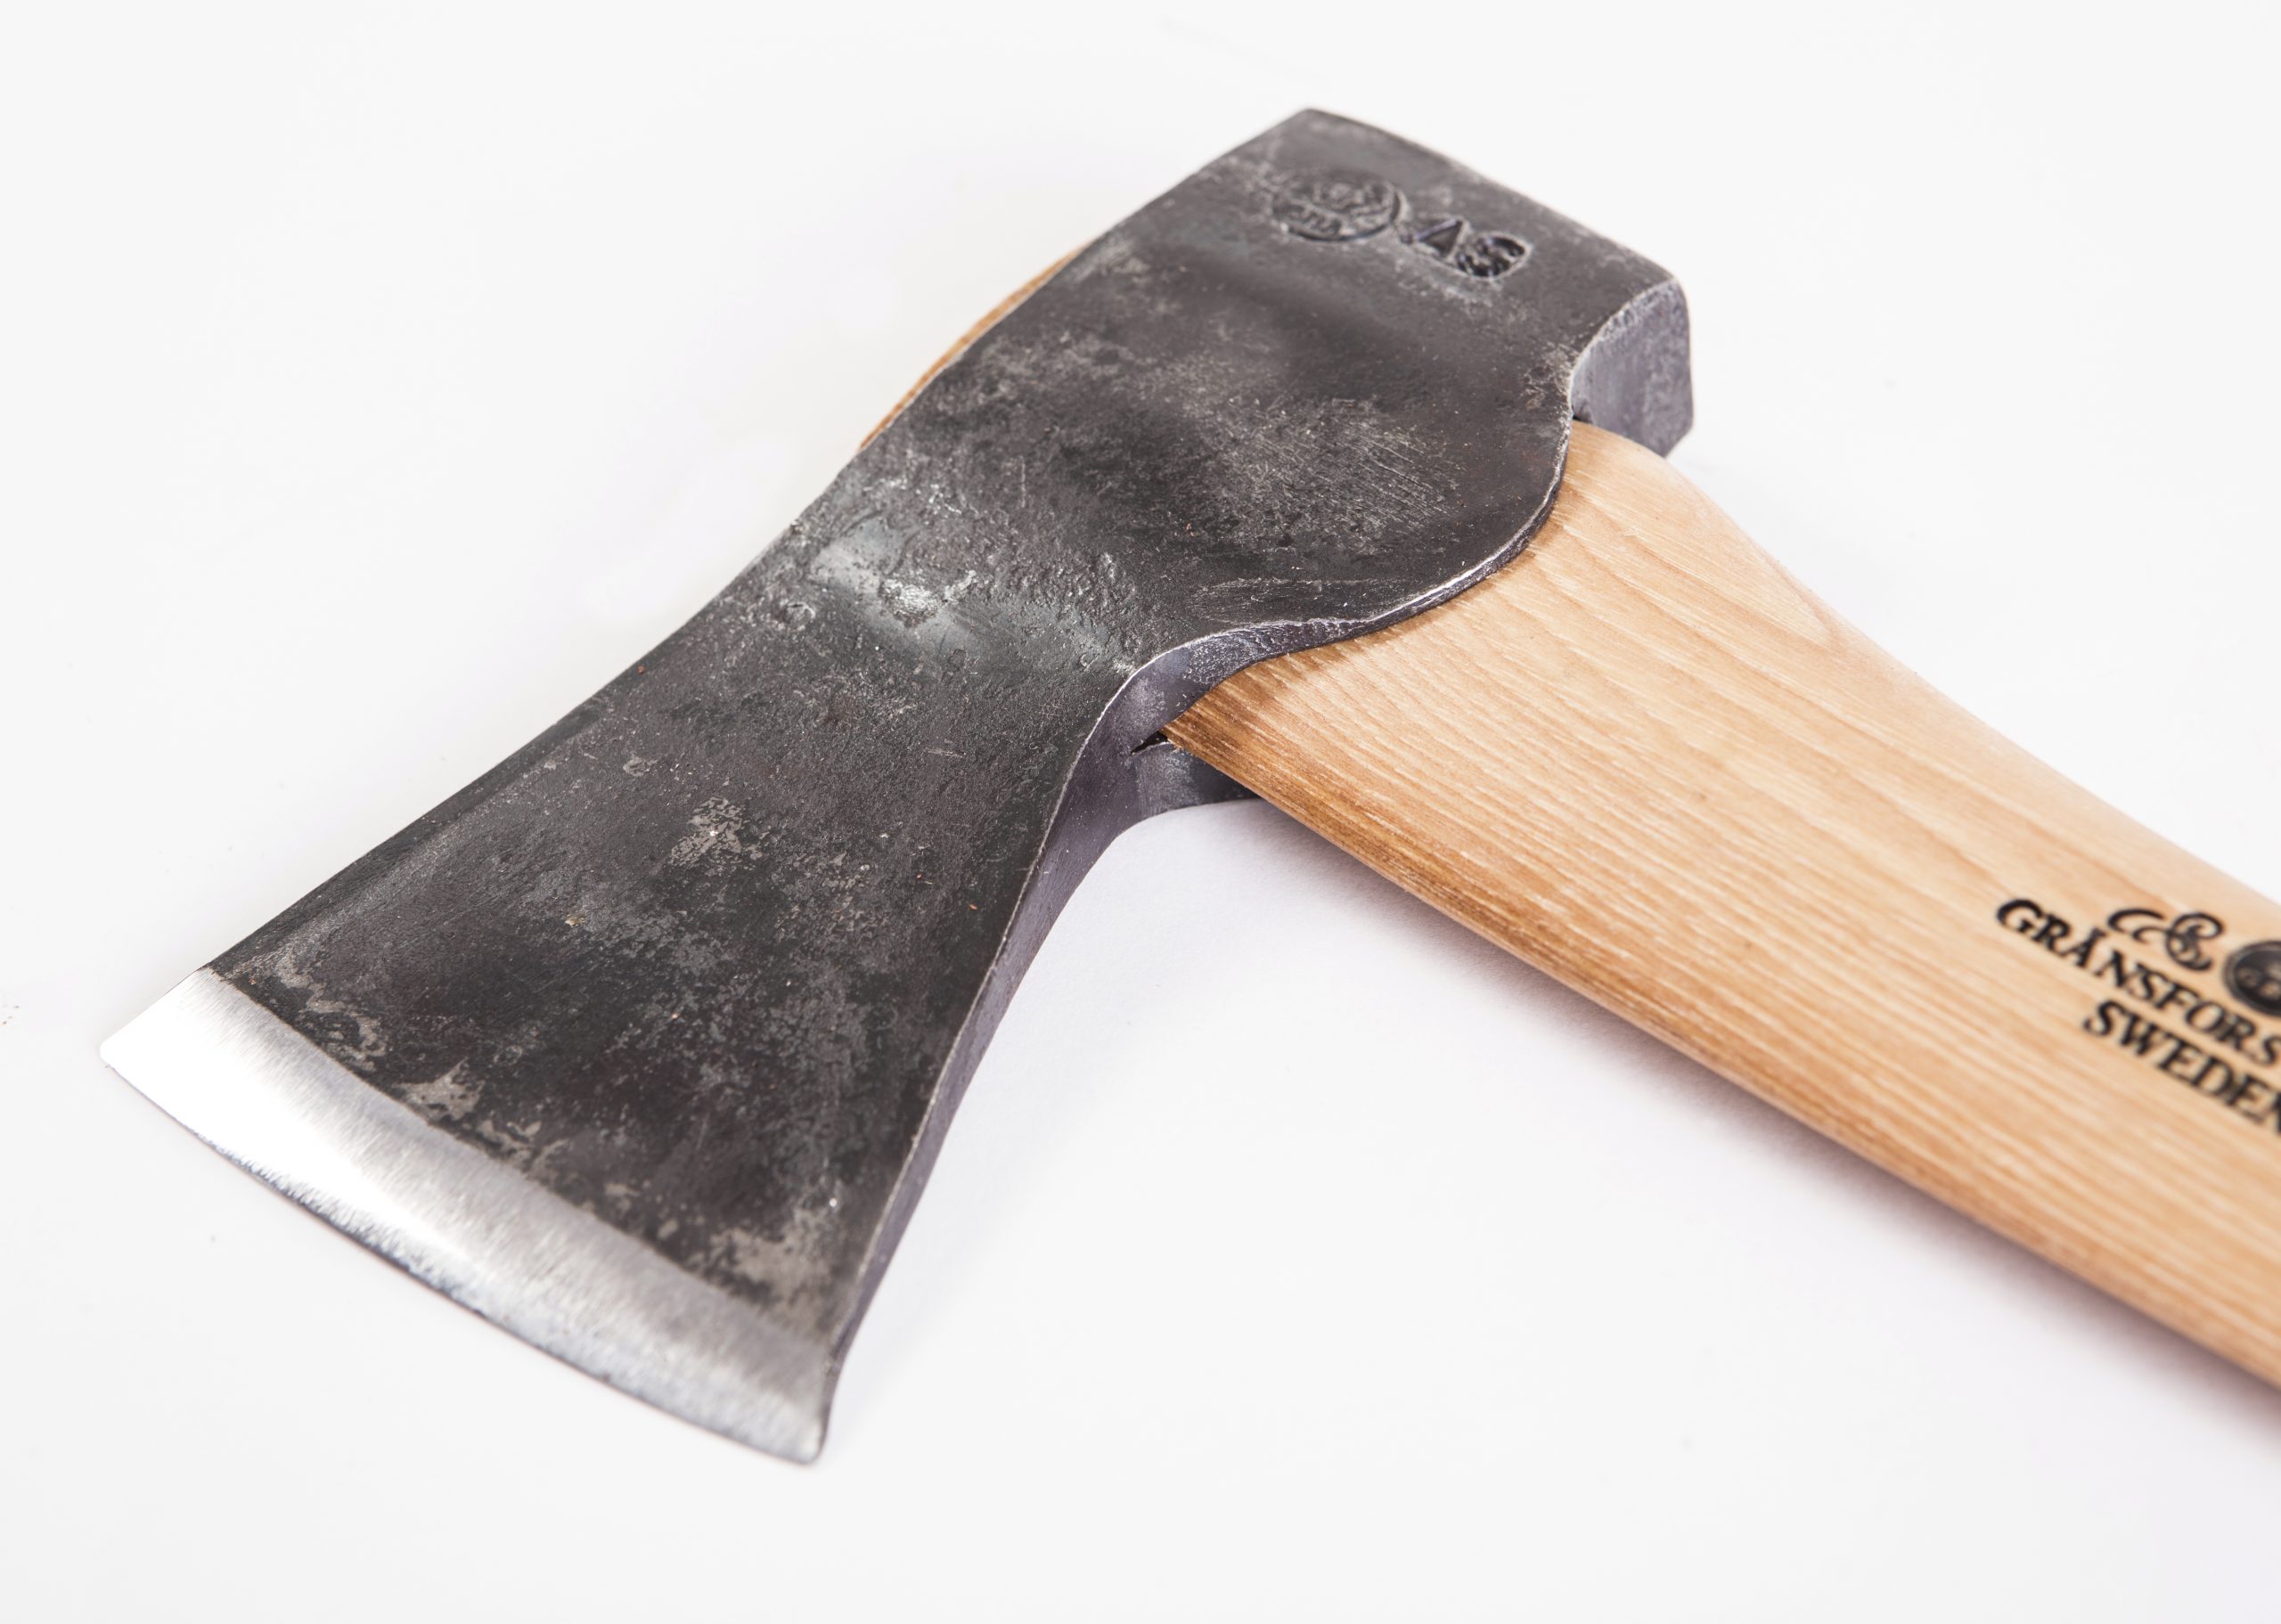 Gransfors Bruk Small Forest Axe | Small Forest Axe